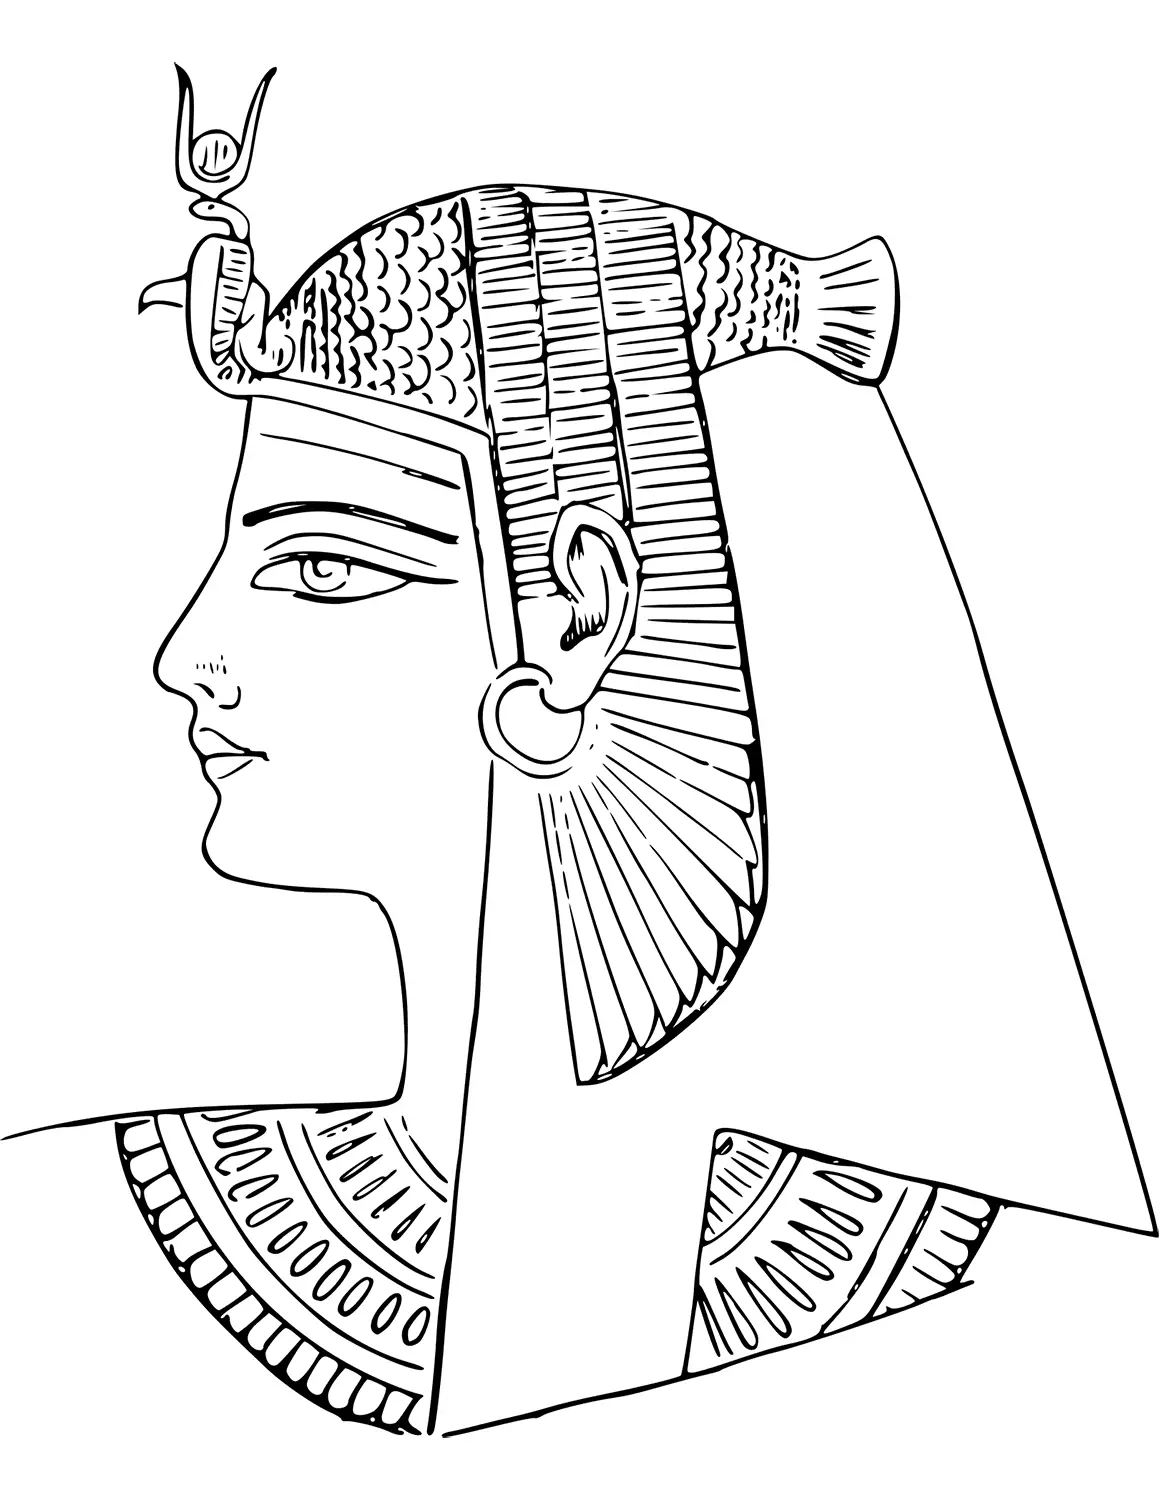 rameses-iii- Free Clipart Coloring Pages for Kids Adults Art Activities Line Art